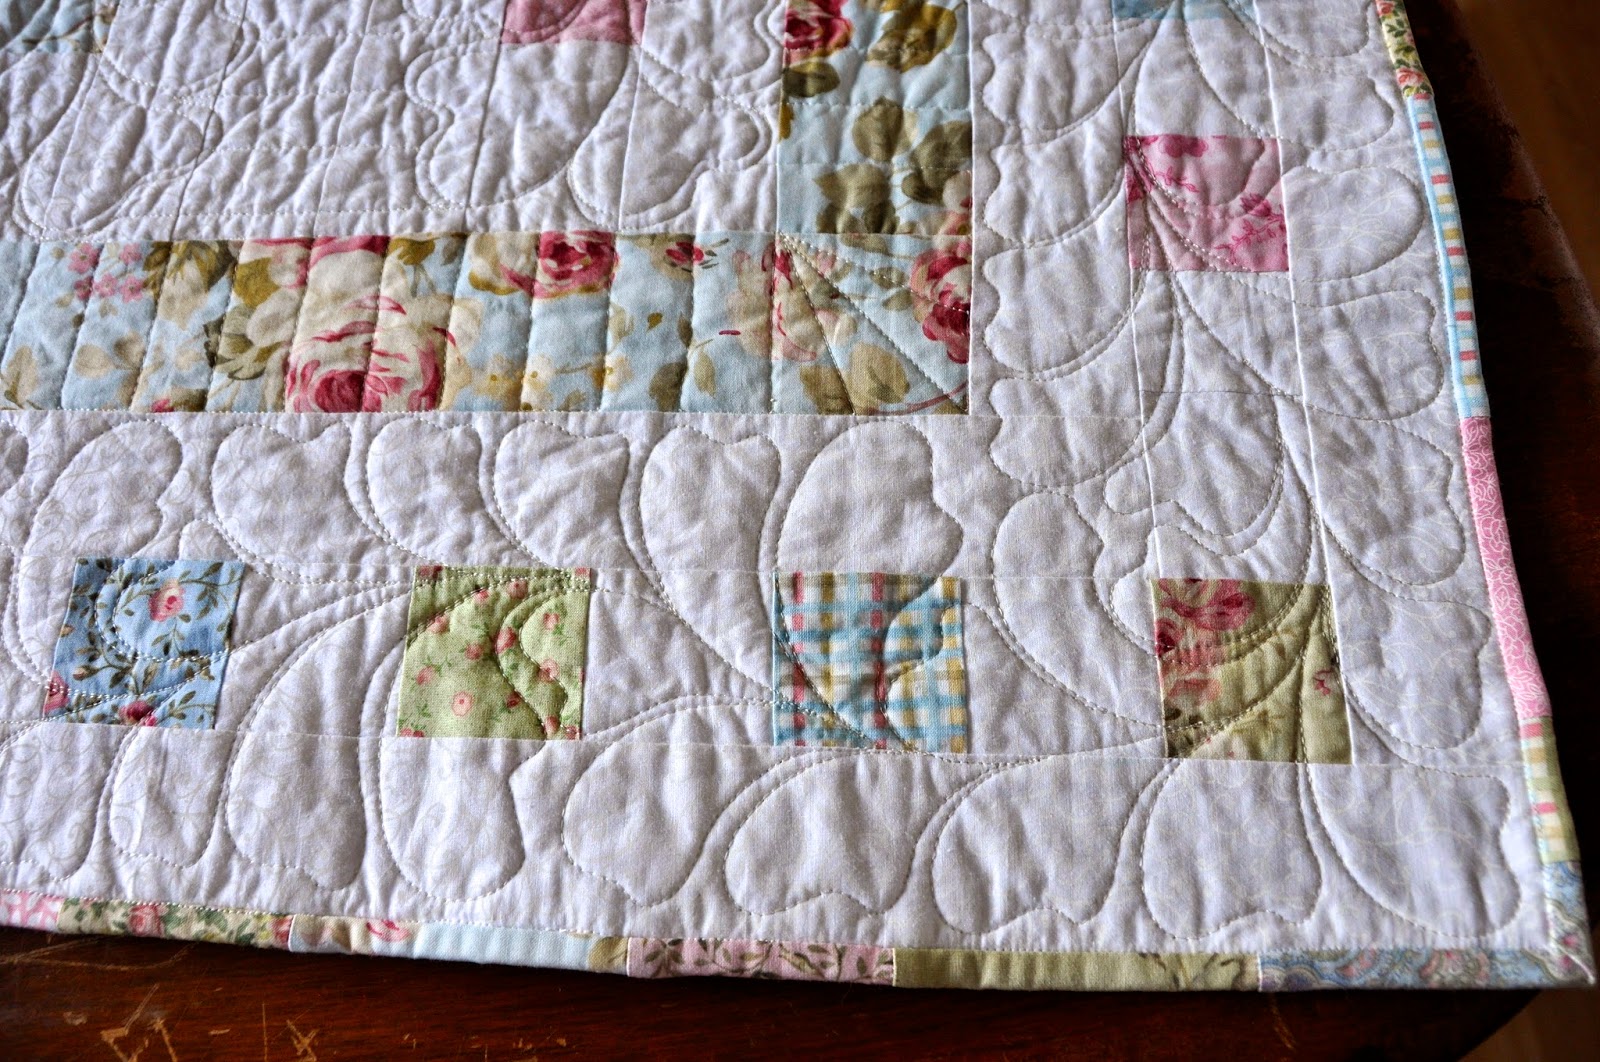 5 Methods to Make Quilt Basting a Breeze